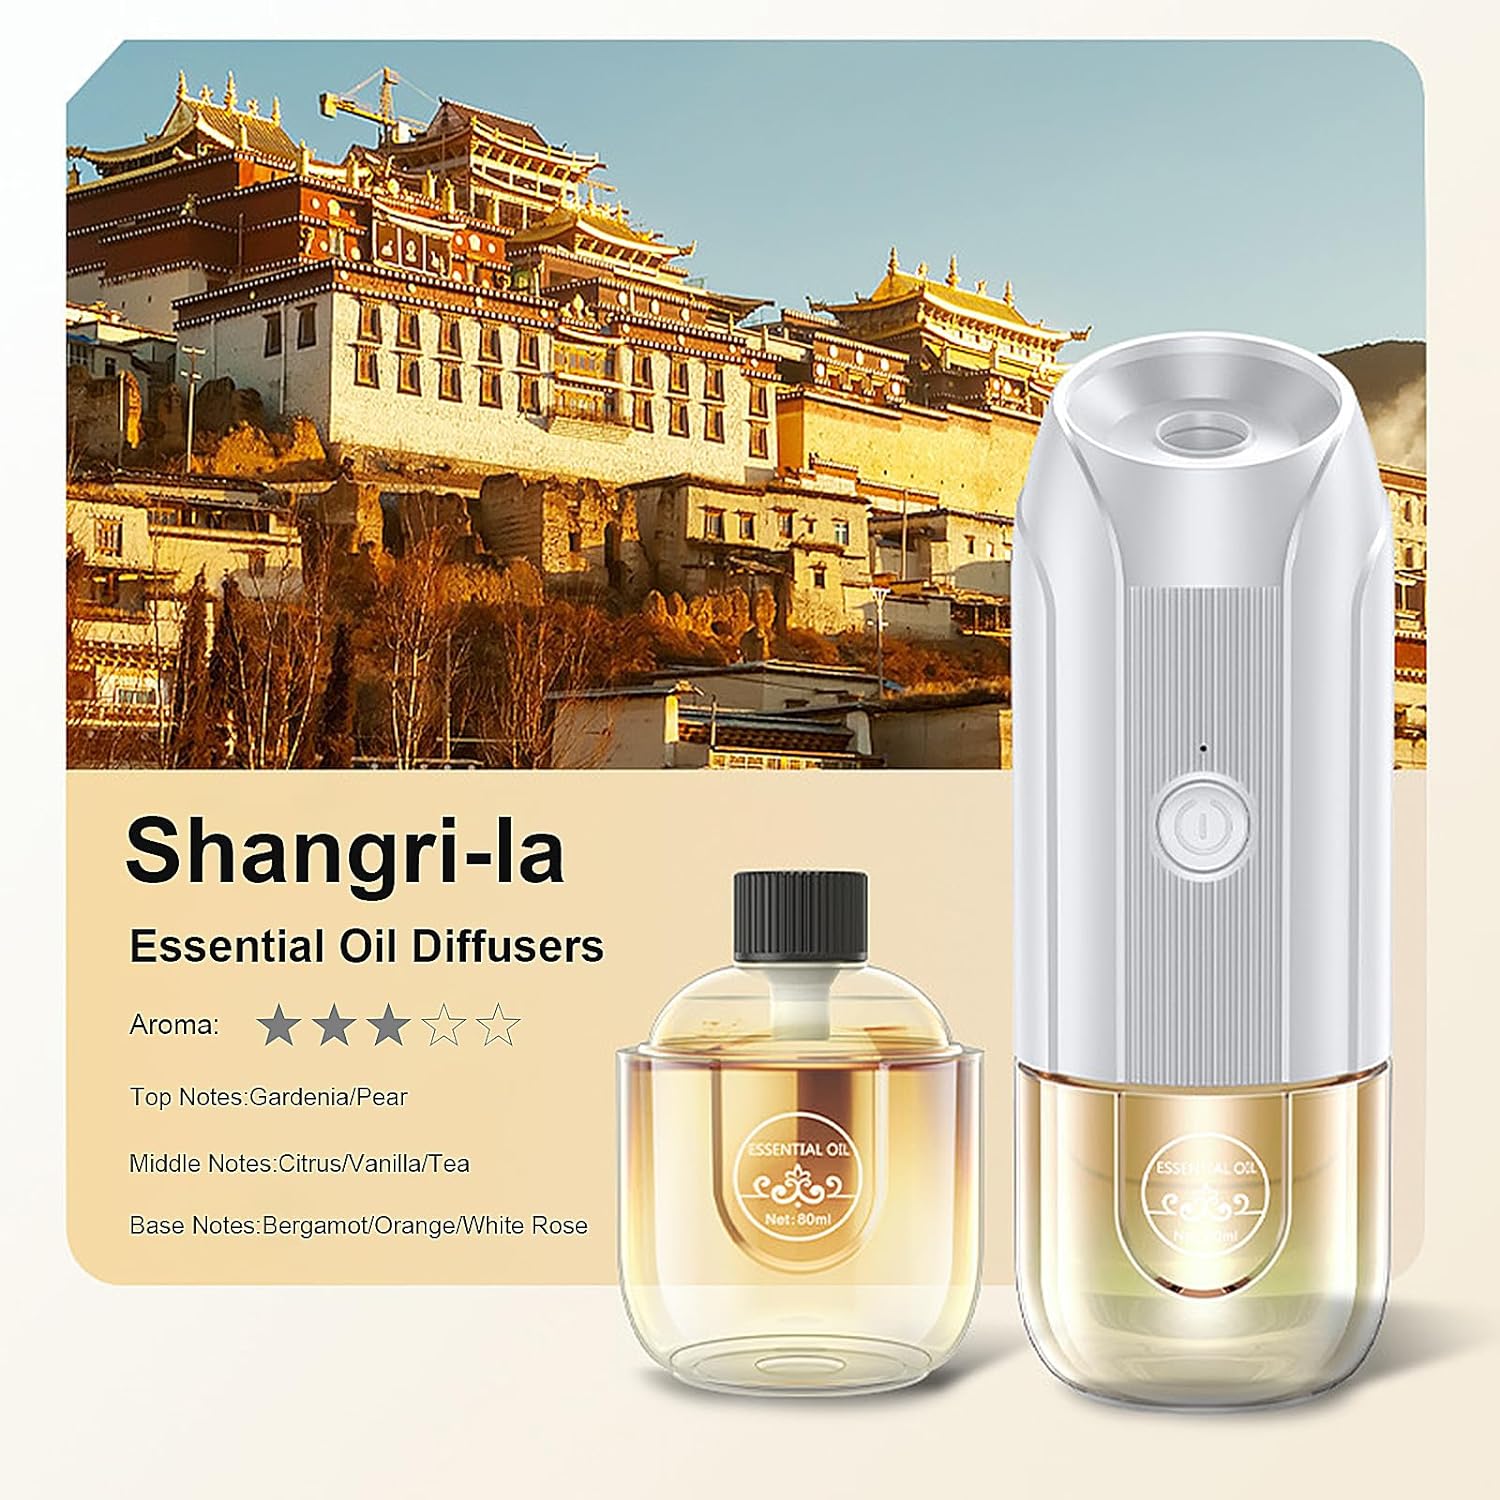 Mini Essential Oil Diffuser, Ultrasonic Mist Air Fresheners for Home with 80 ml Shangri-La Essential Oils,Wireless Scent Diffuser,3 Adjustable Aroma Mode, Automatic Spray Lasts Up to 35 Days